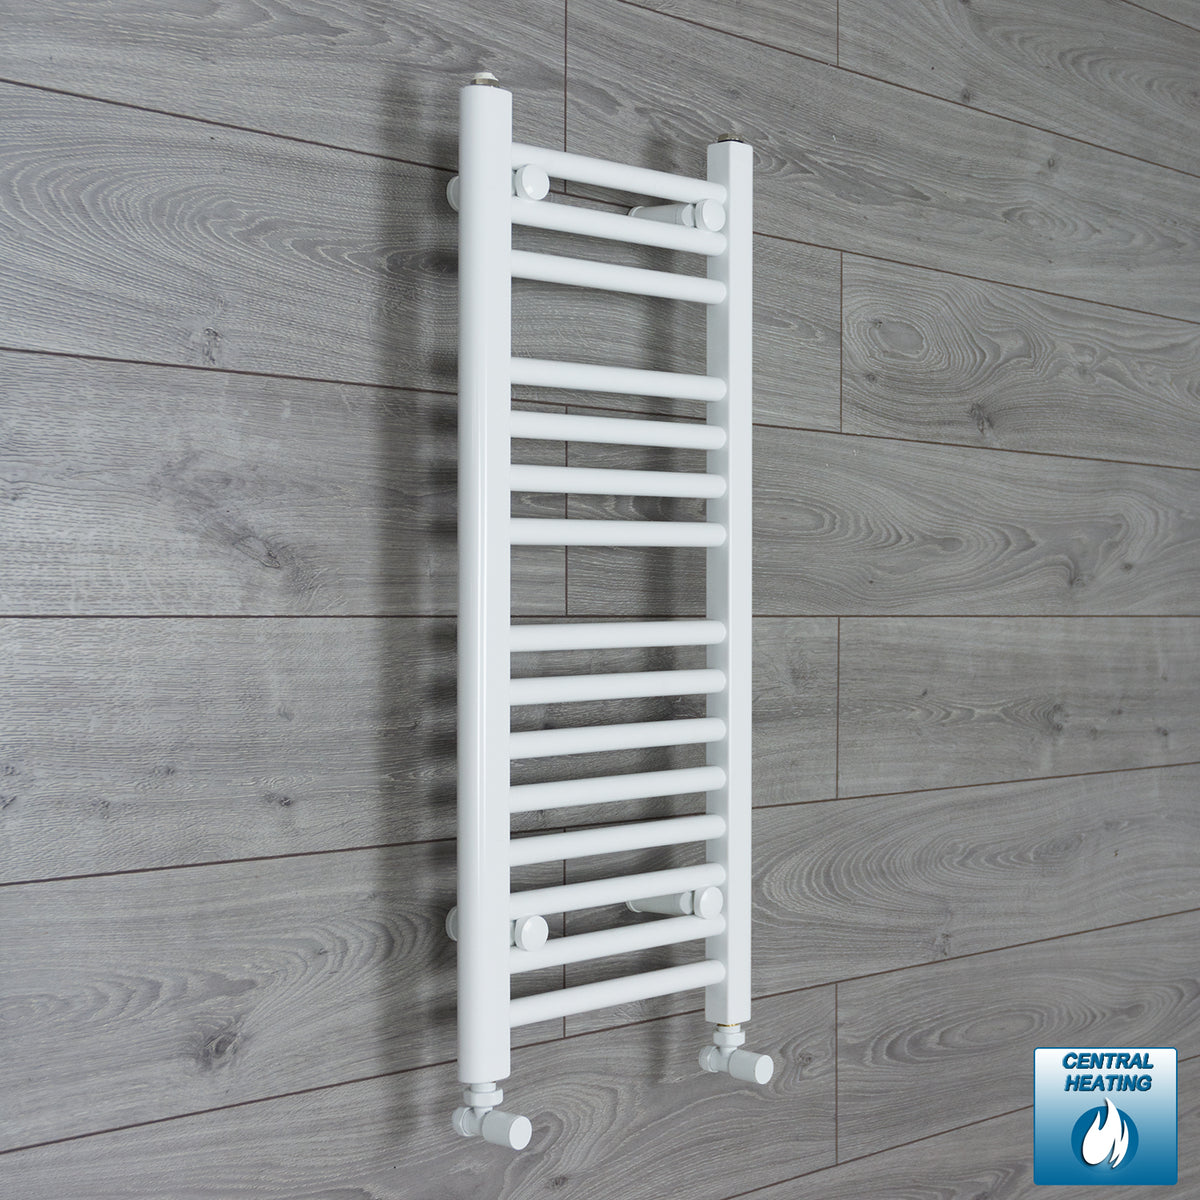 350mm Wide 800mm High White Towel Rail Radiator With Angled Valve